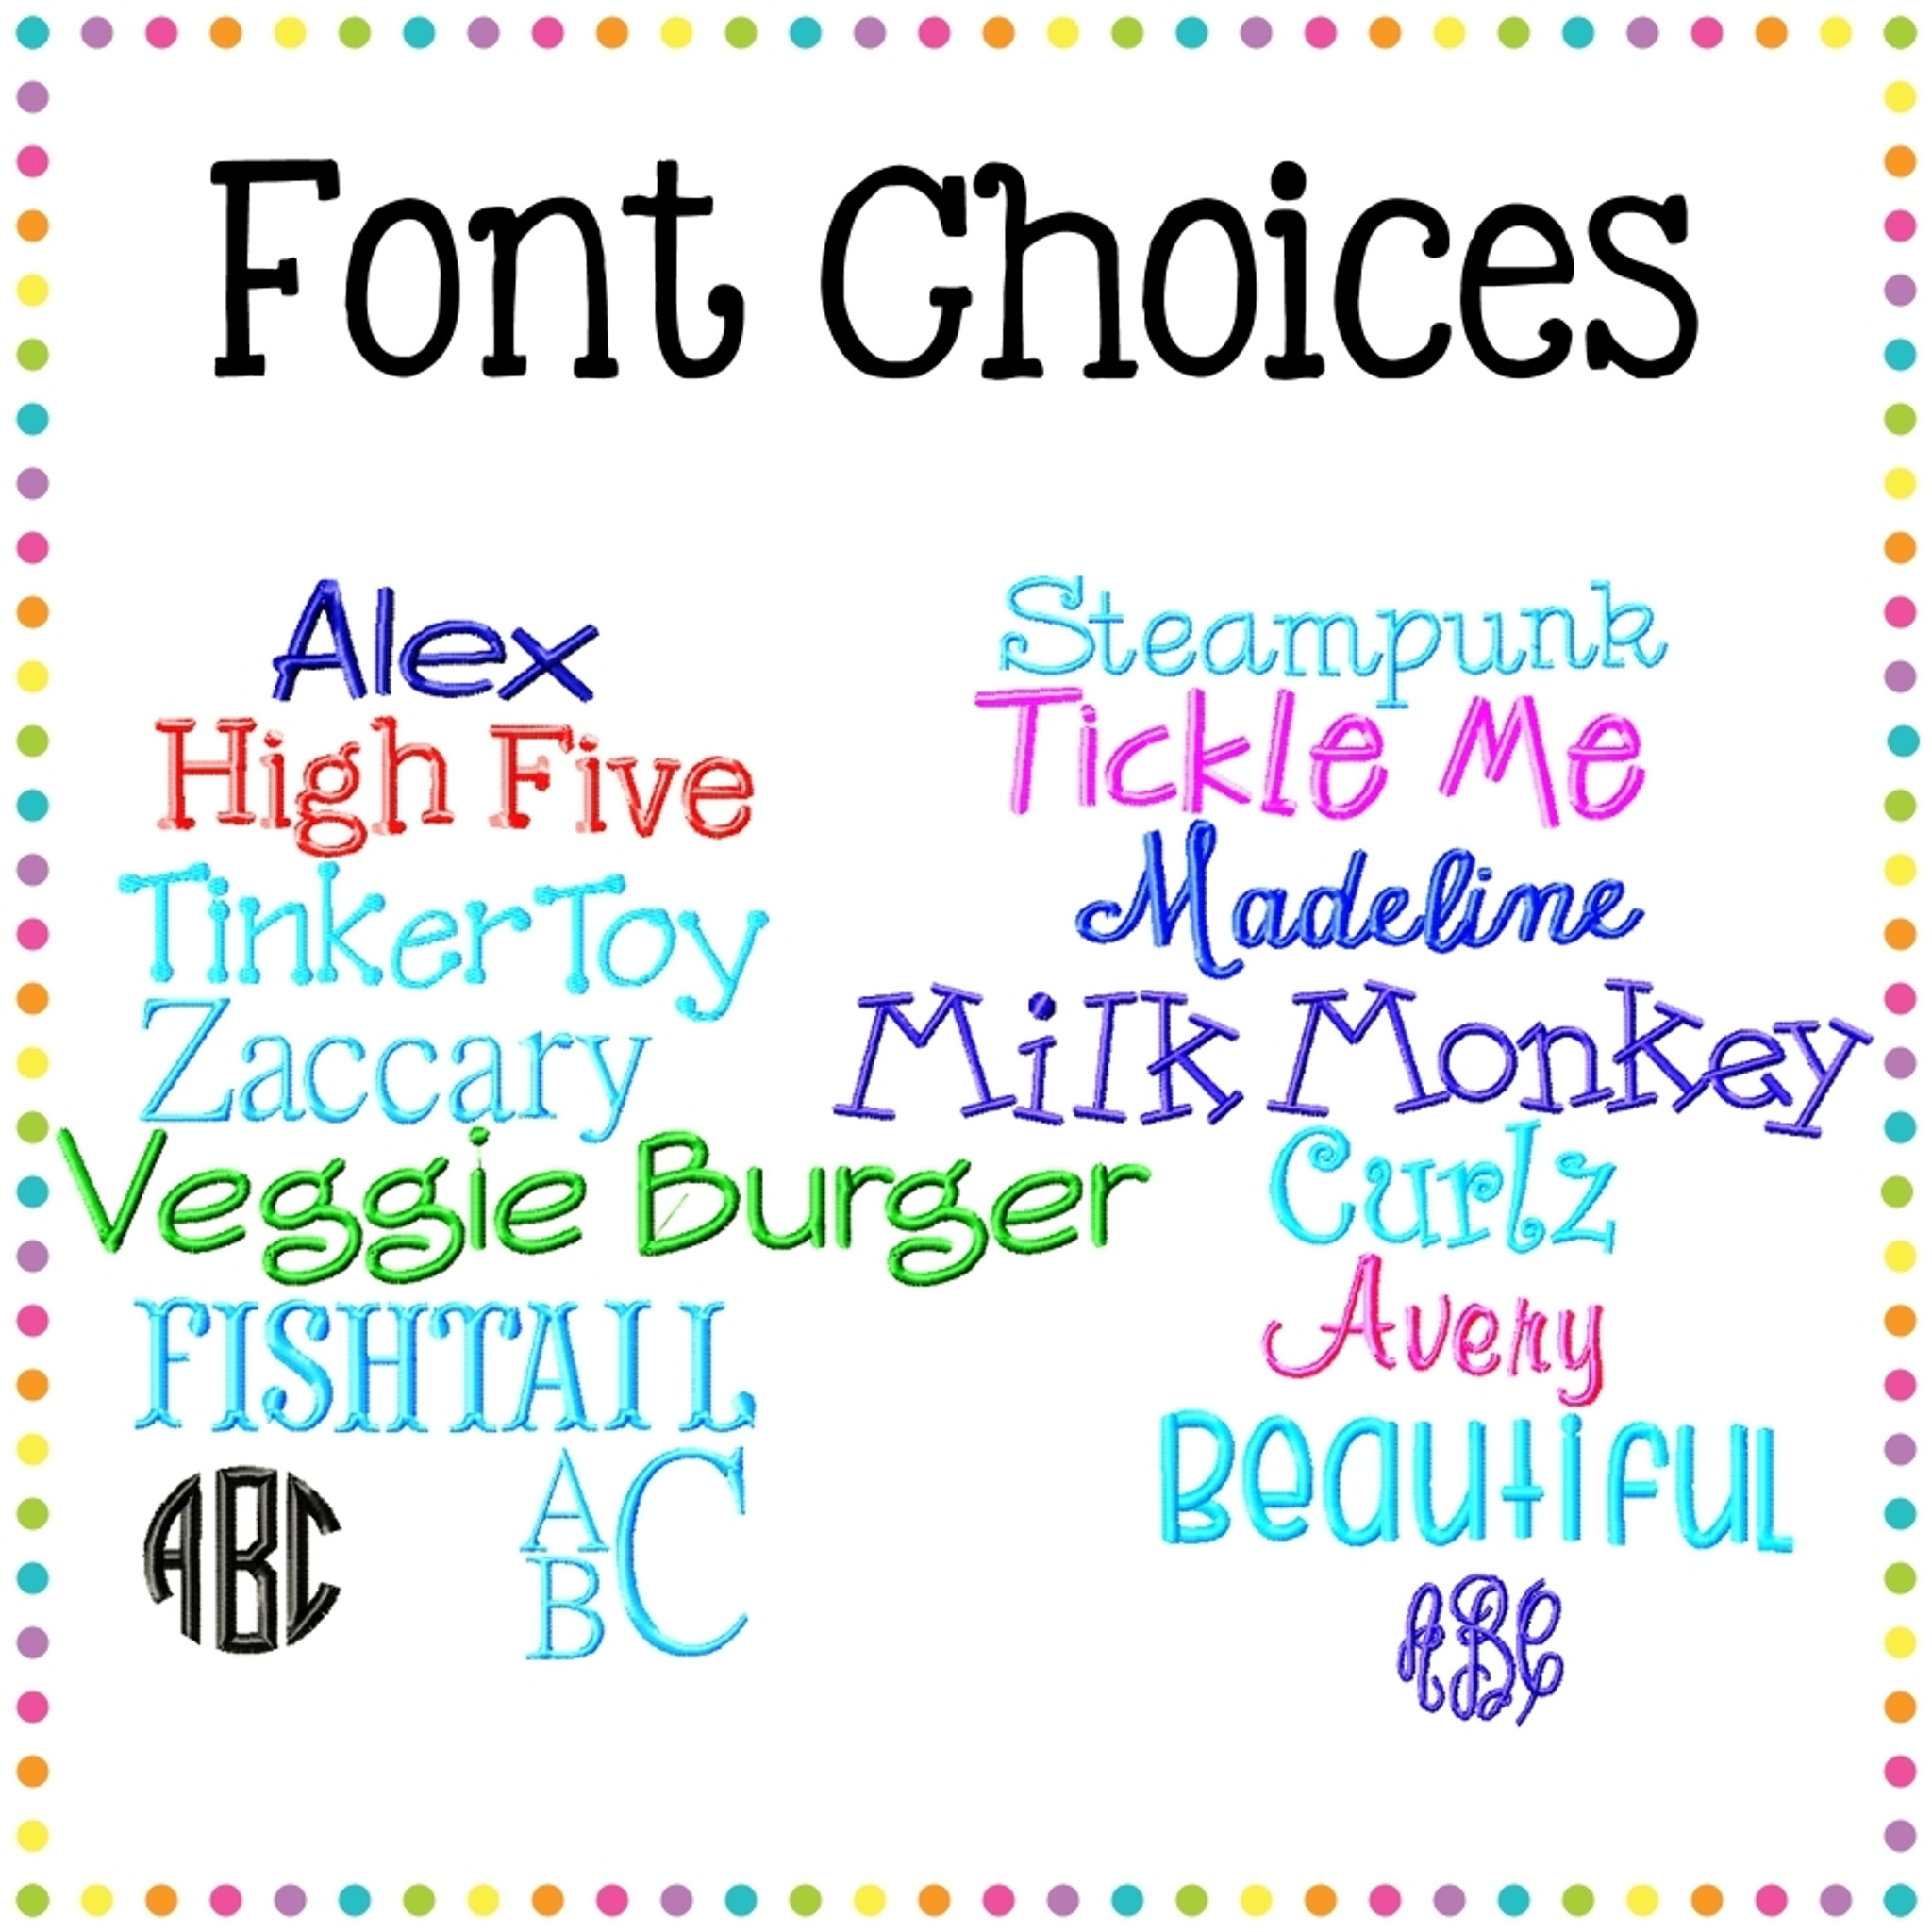 Font Choices